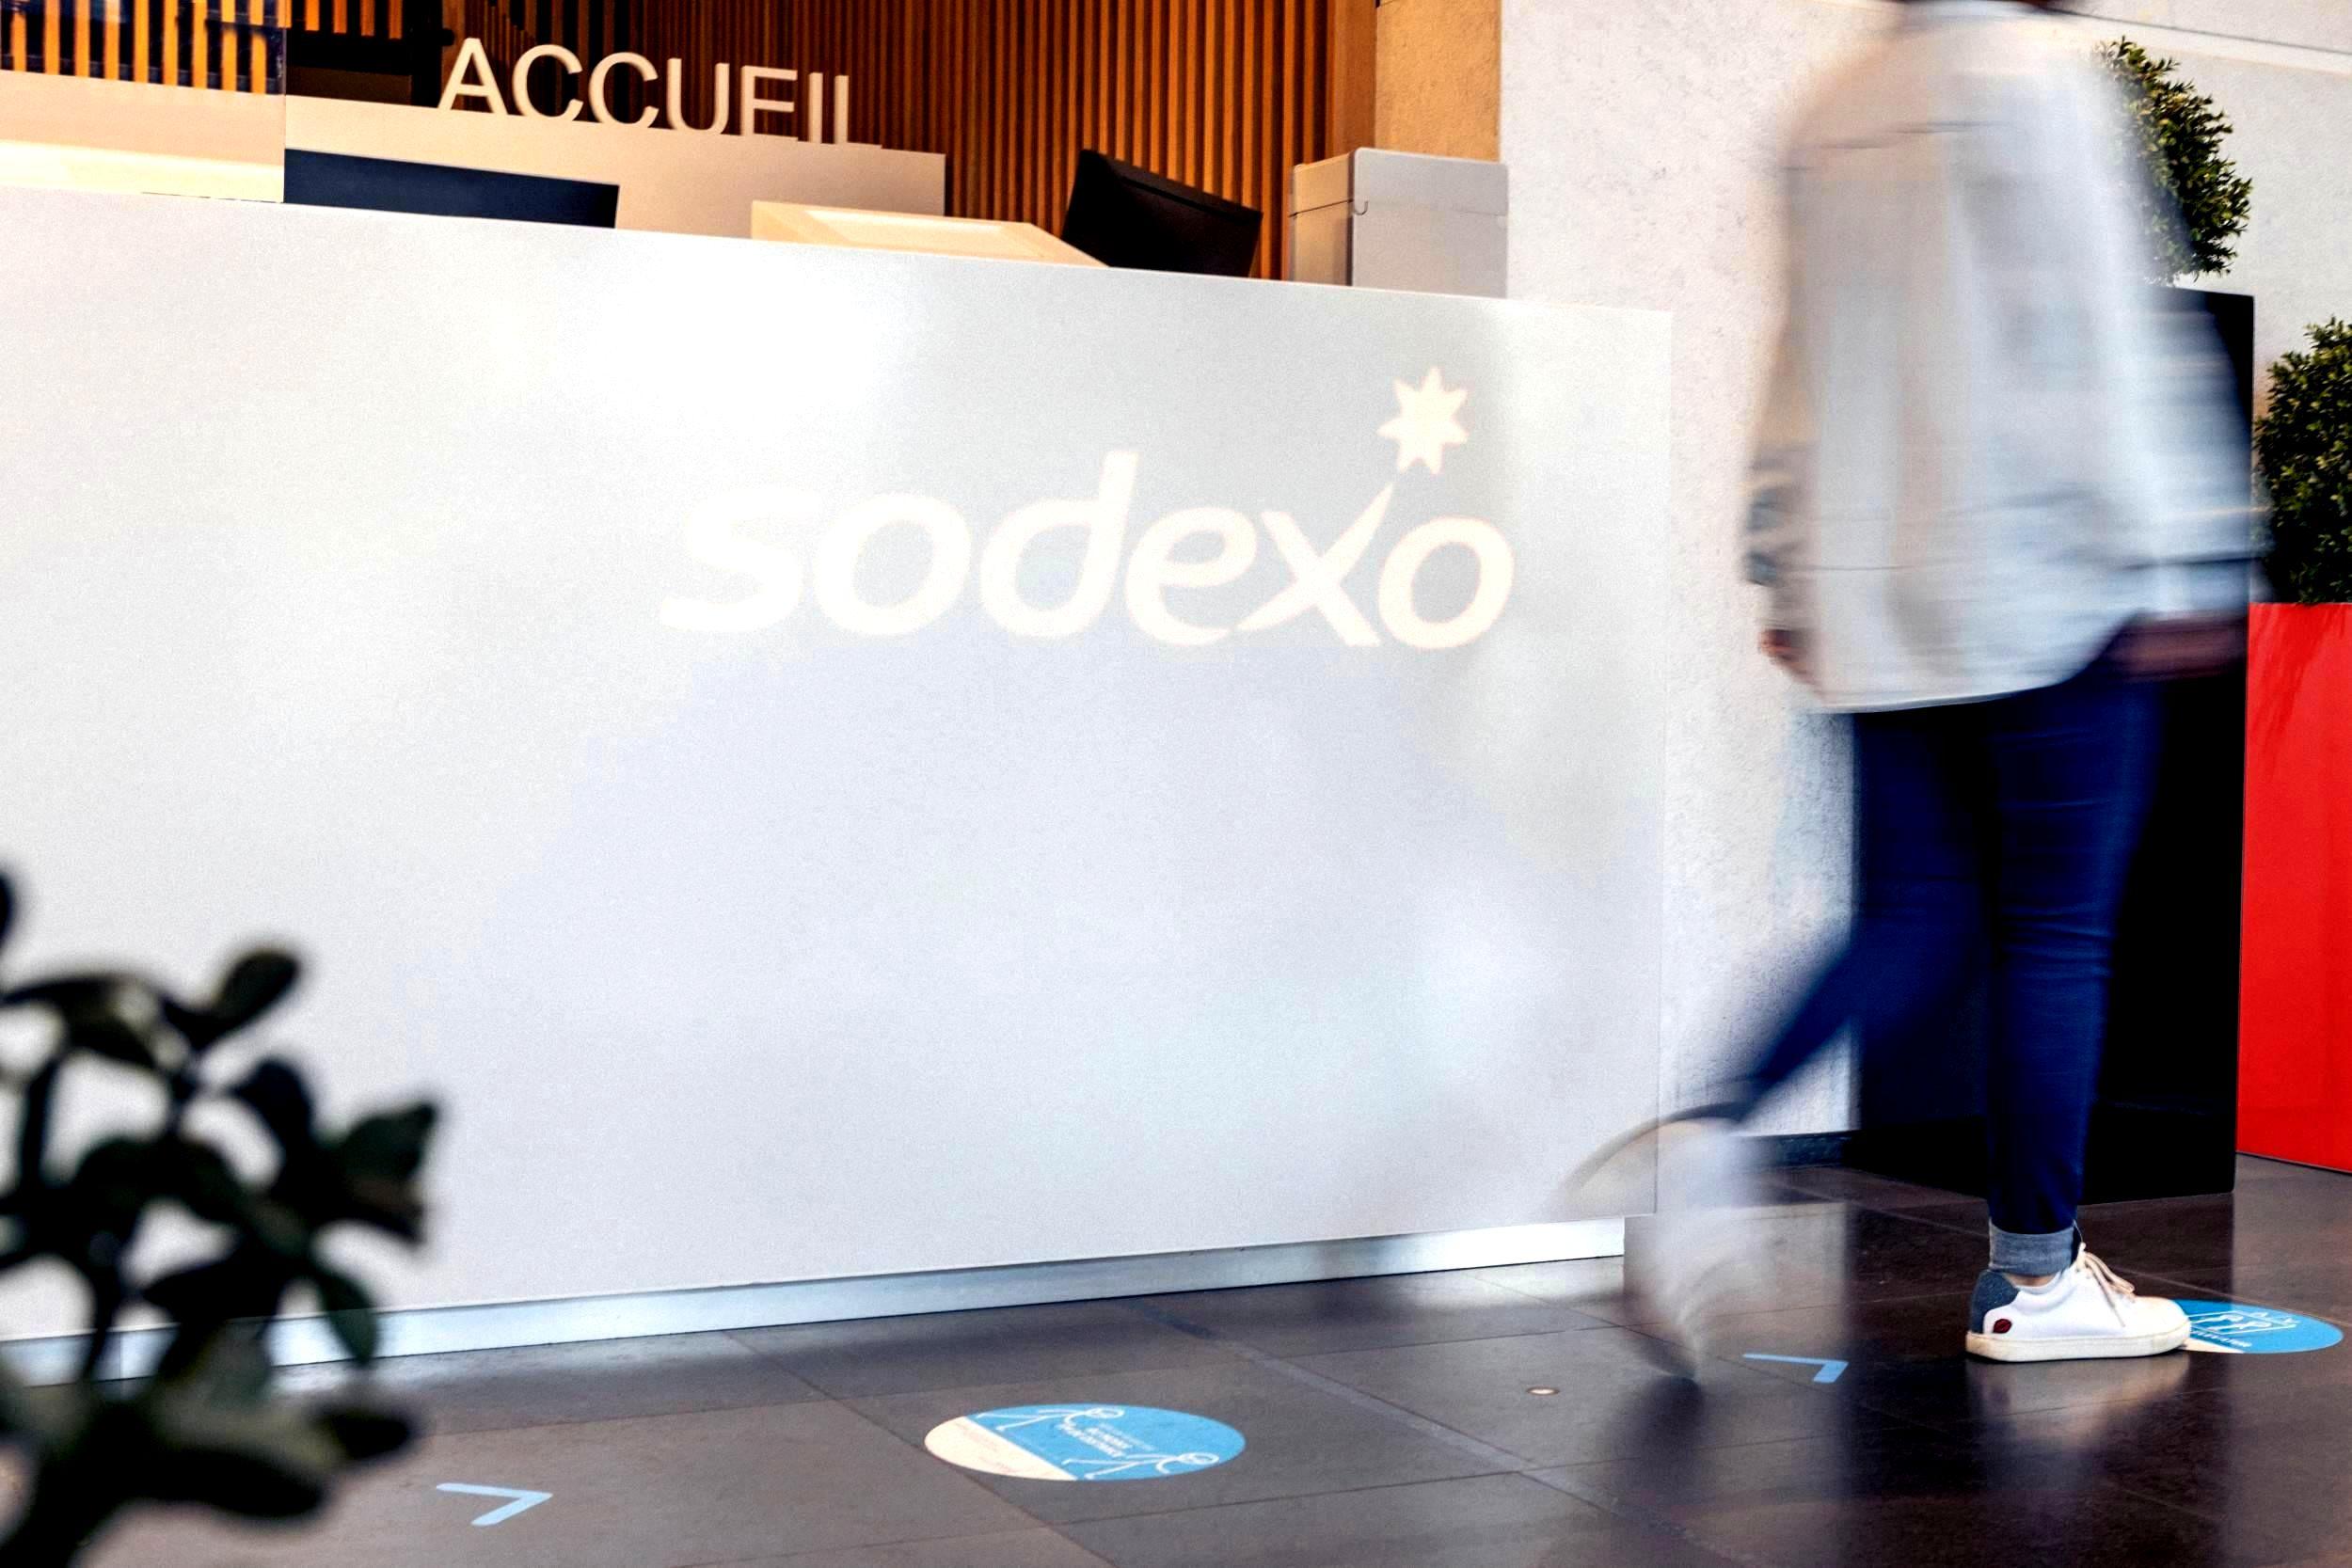 About Sodexo